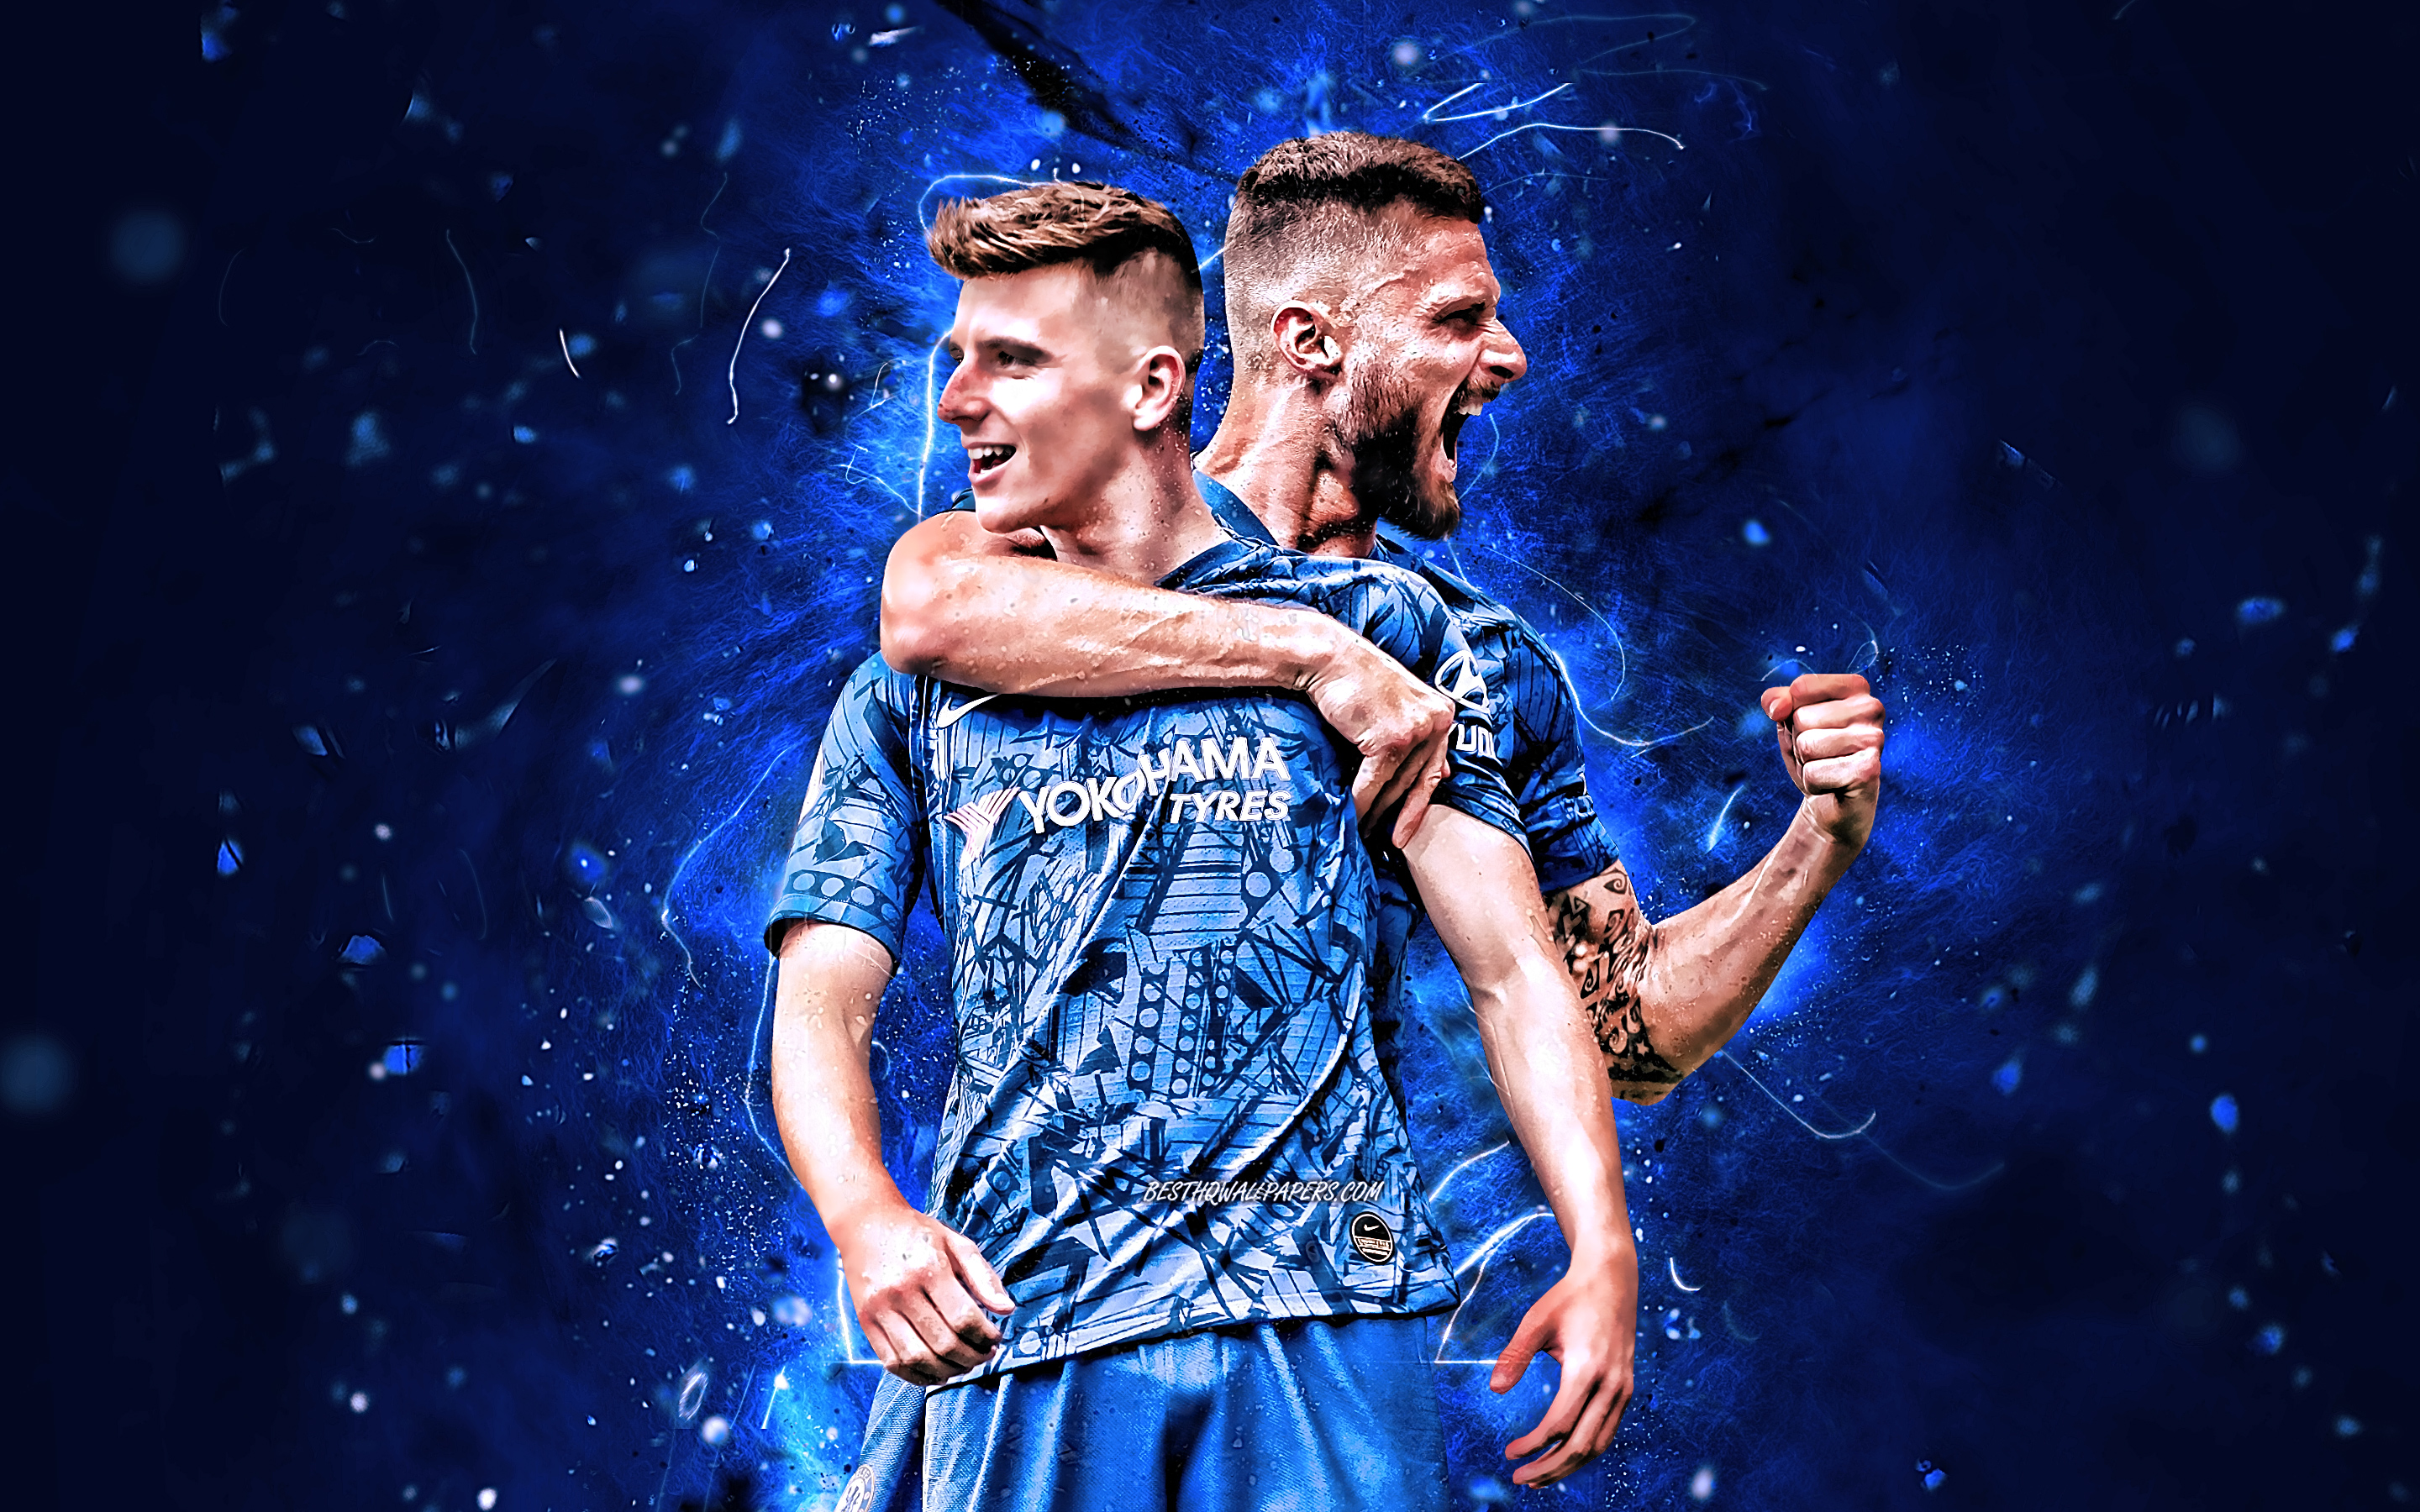 Download wallpaper Mason Mount and Olivier Giroud, goal, Chelsea FC, english footballers, Premier League, soccer, Olivier Giroud, Mount Chelsea, football, neon lights, England for desktop with resolution 2880x1800. High Quality HD picture